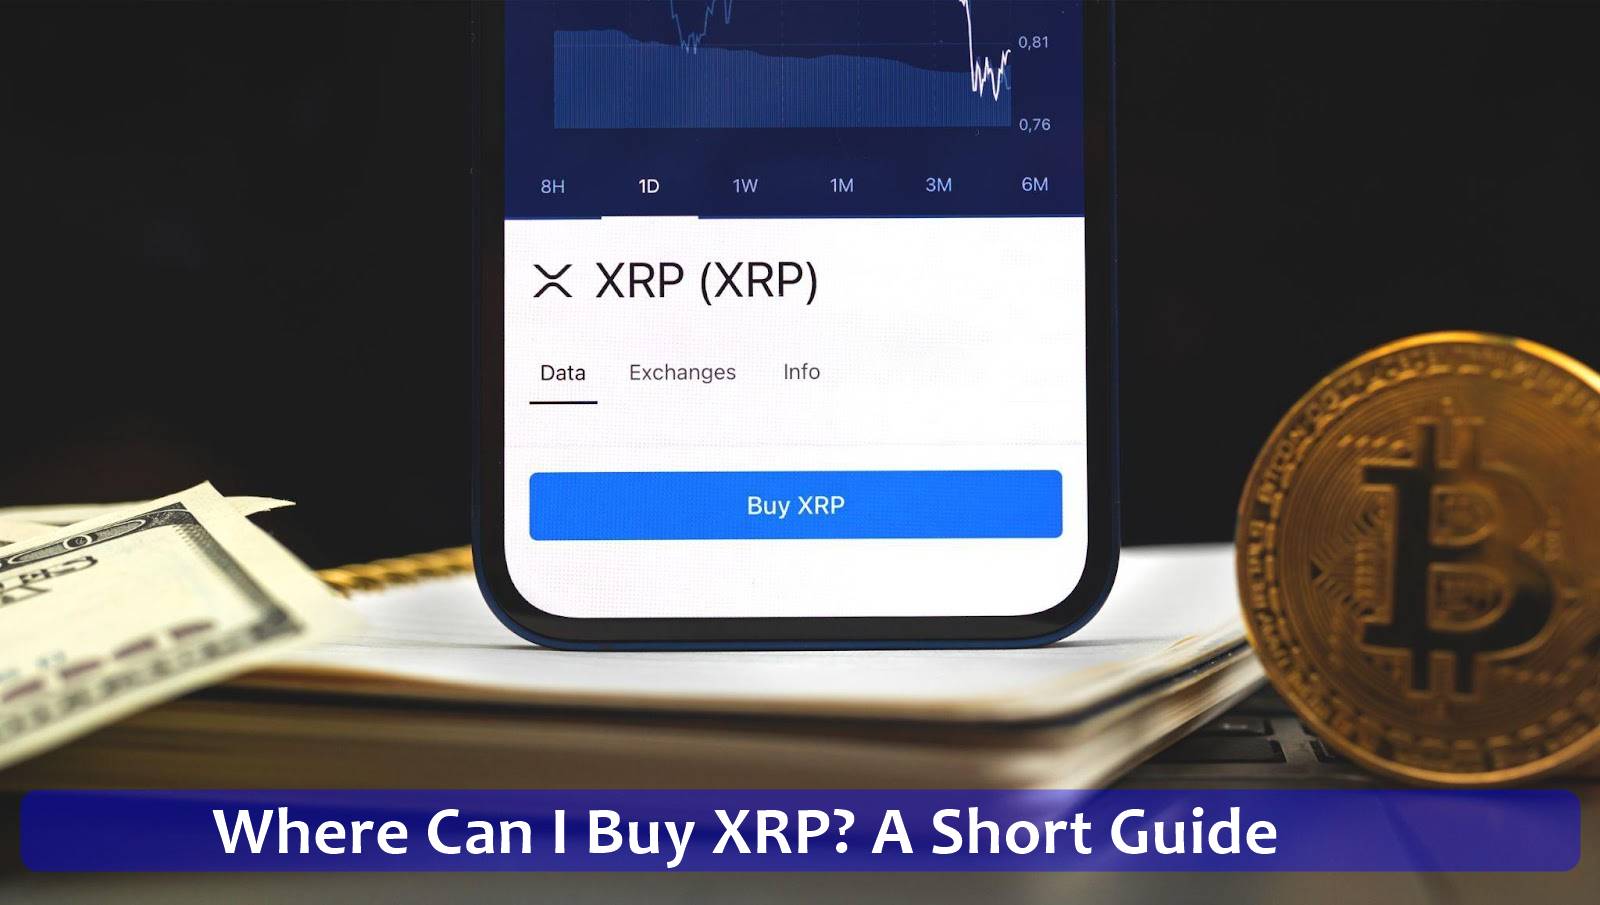 Where Can I Buy XRP? A Short Guide